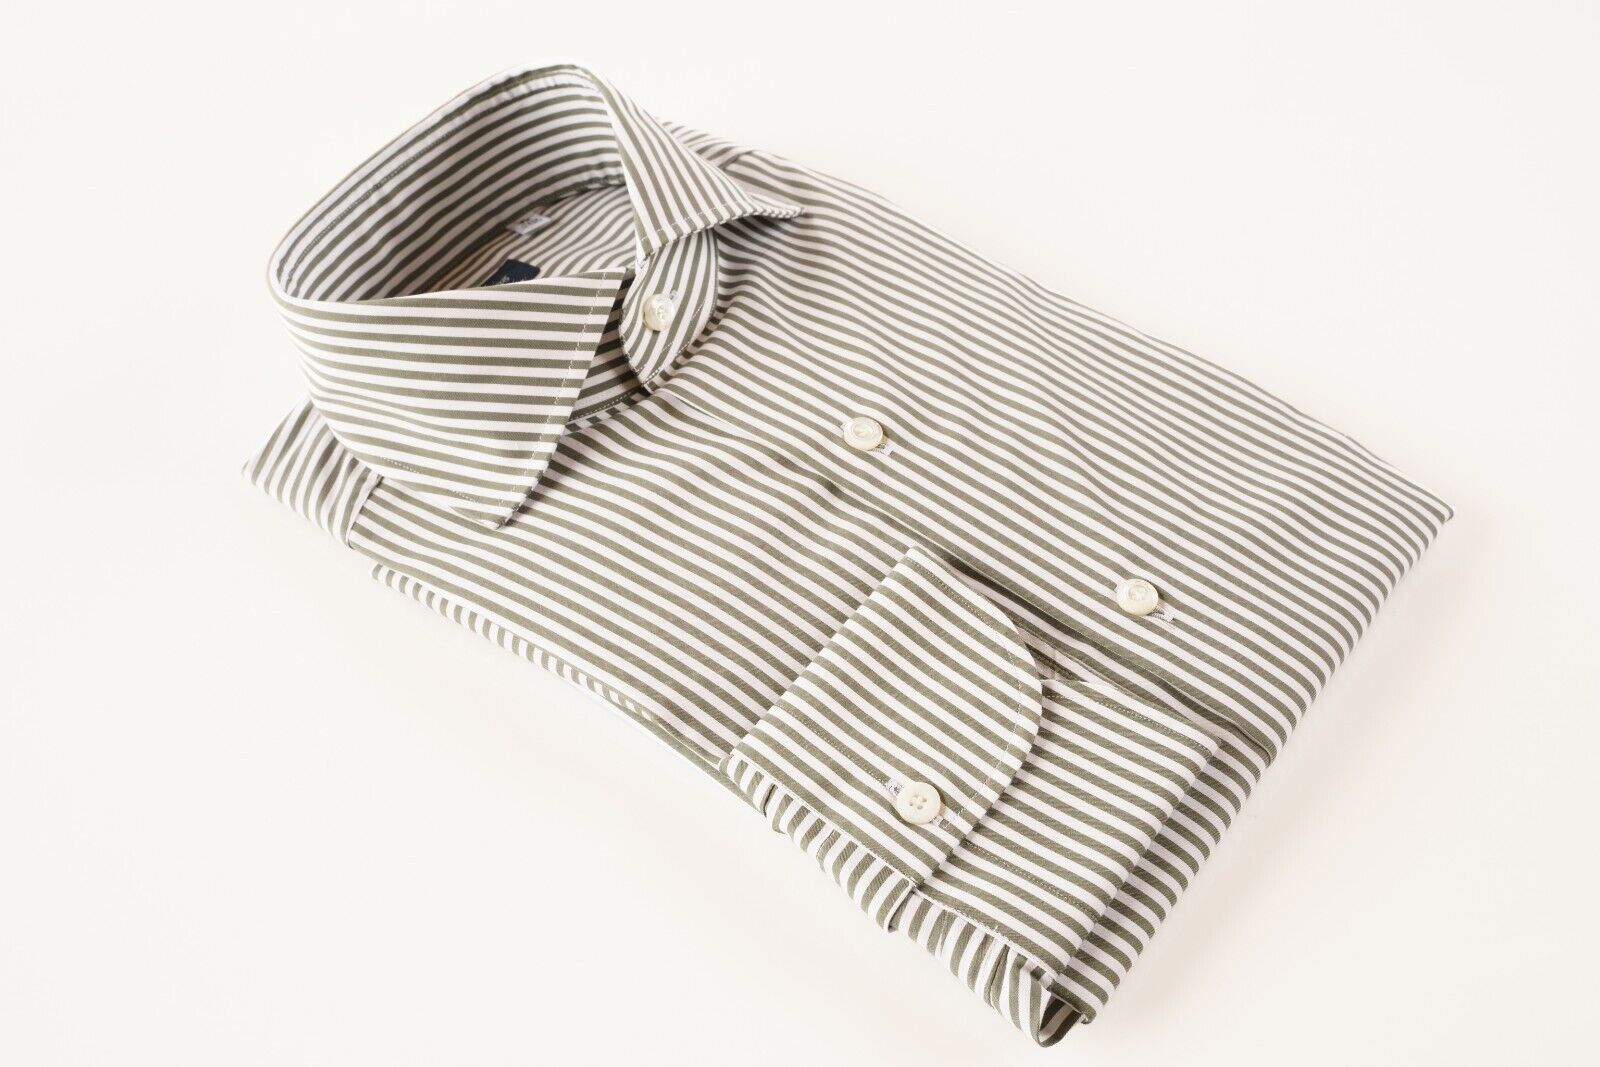 NWT FINAMORE 1975 Taupe White Striped Cotton Spread Collar Dress Shirt 15  1/2 39